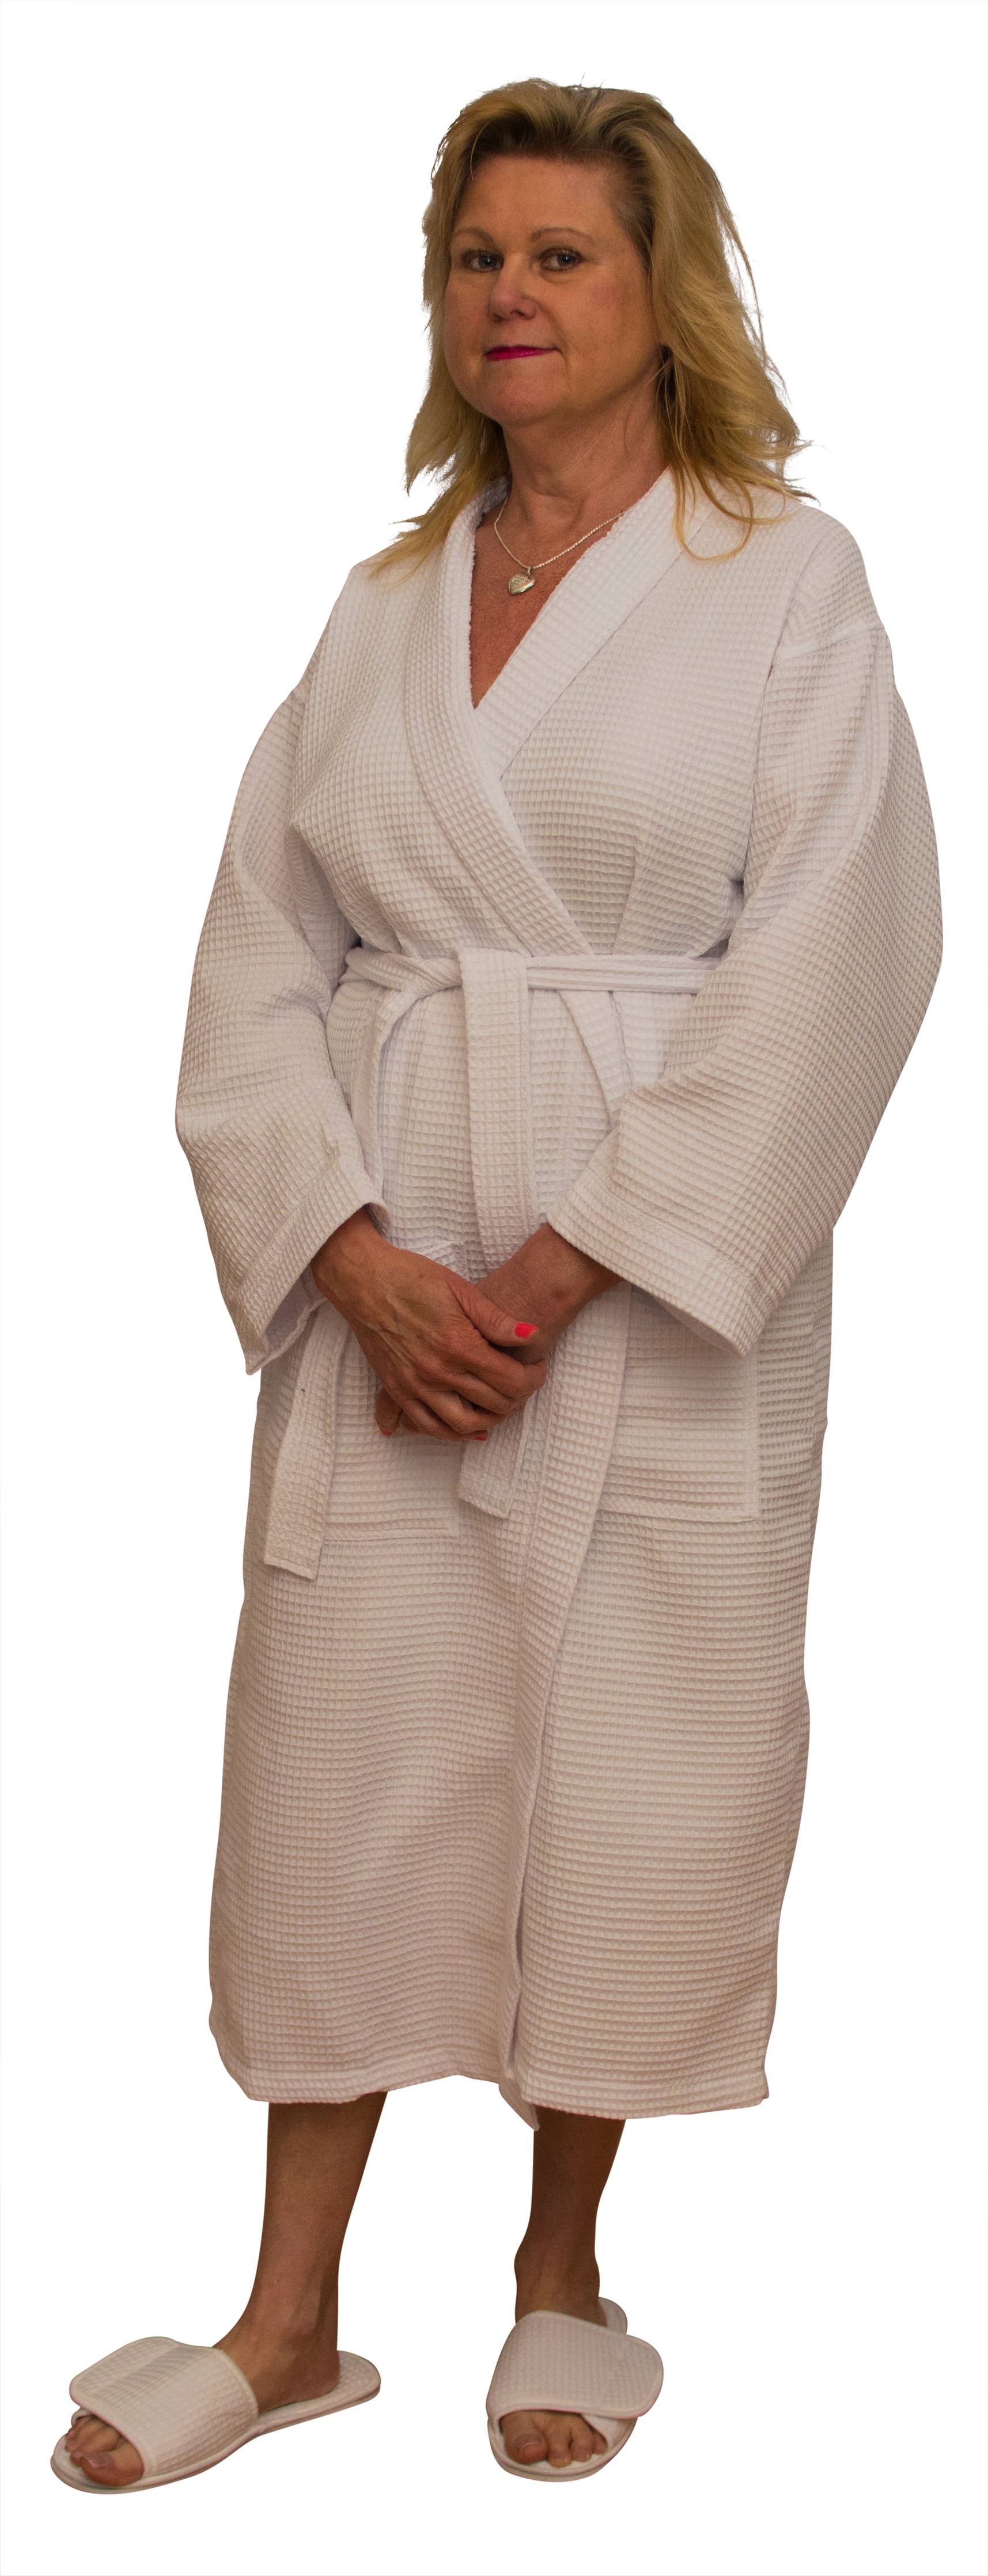 Alan Pendergrass Robes - Cotton/ Waffle Robe,  48", One Size Fits Most